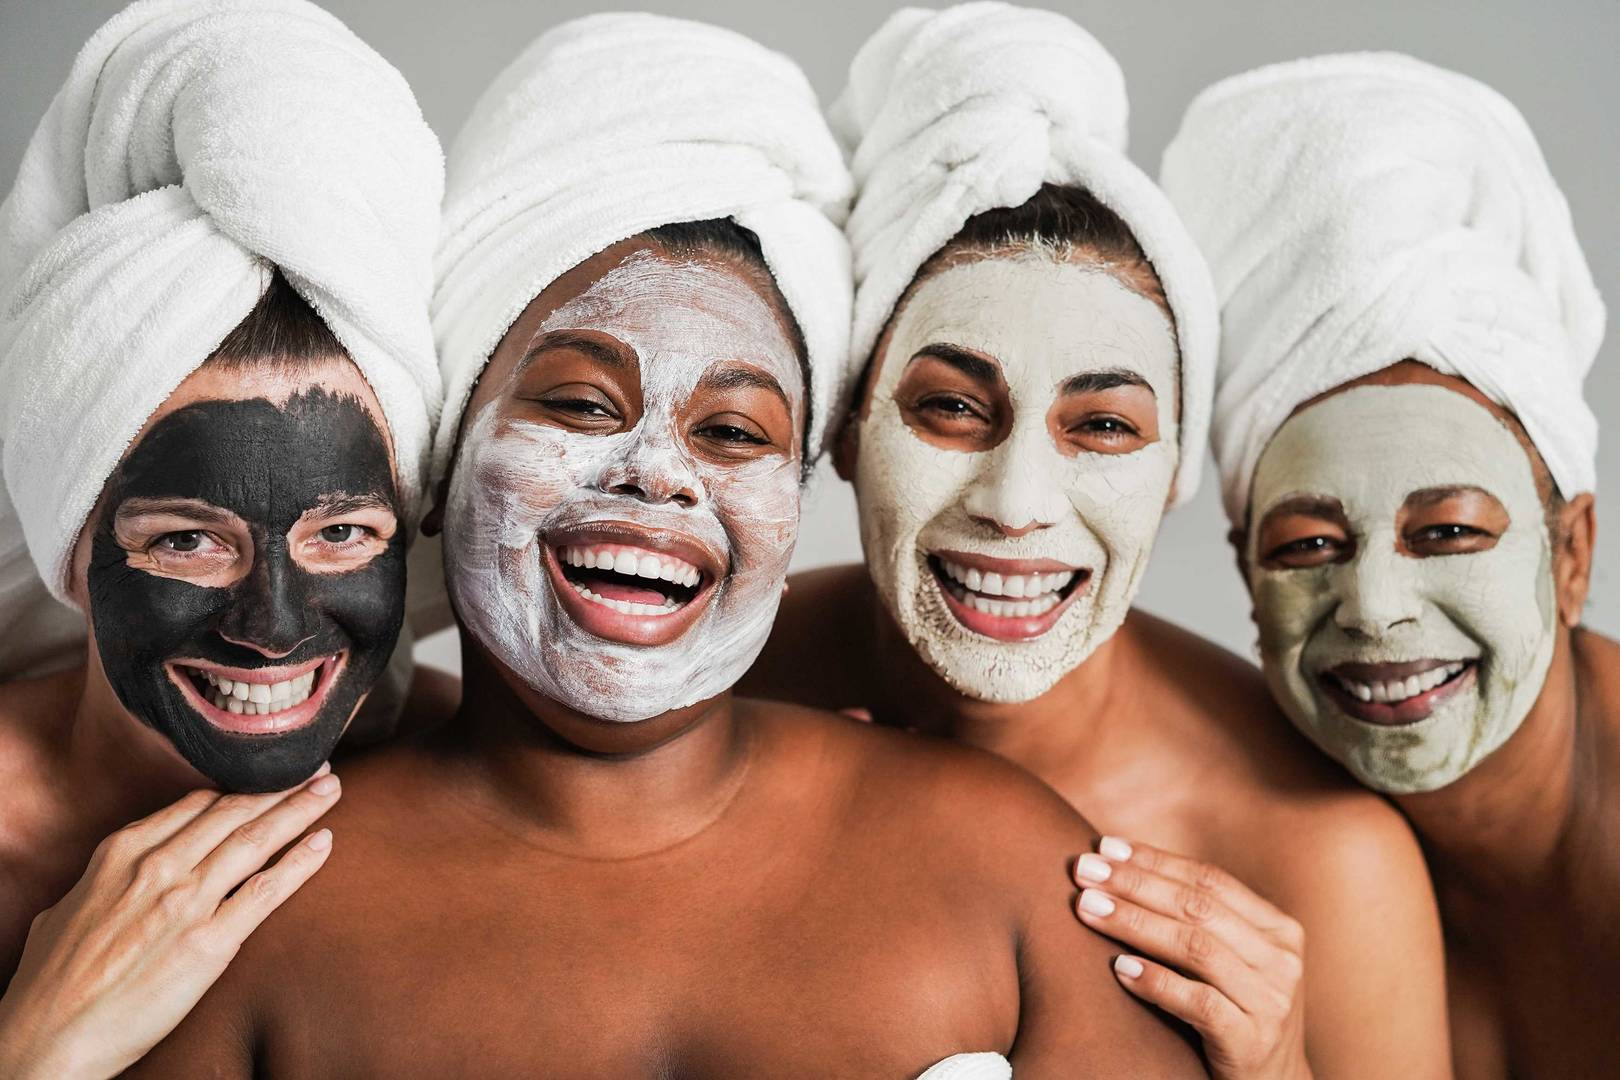 women with face masks on